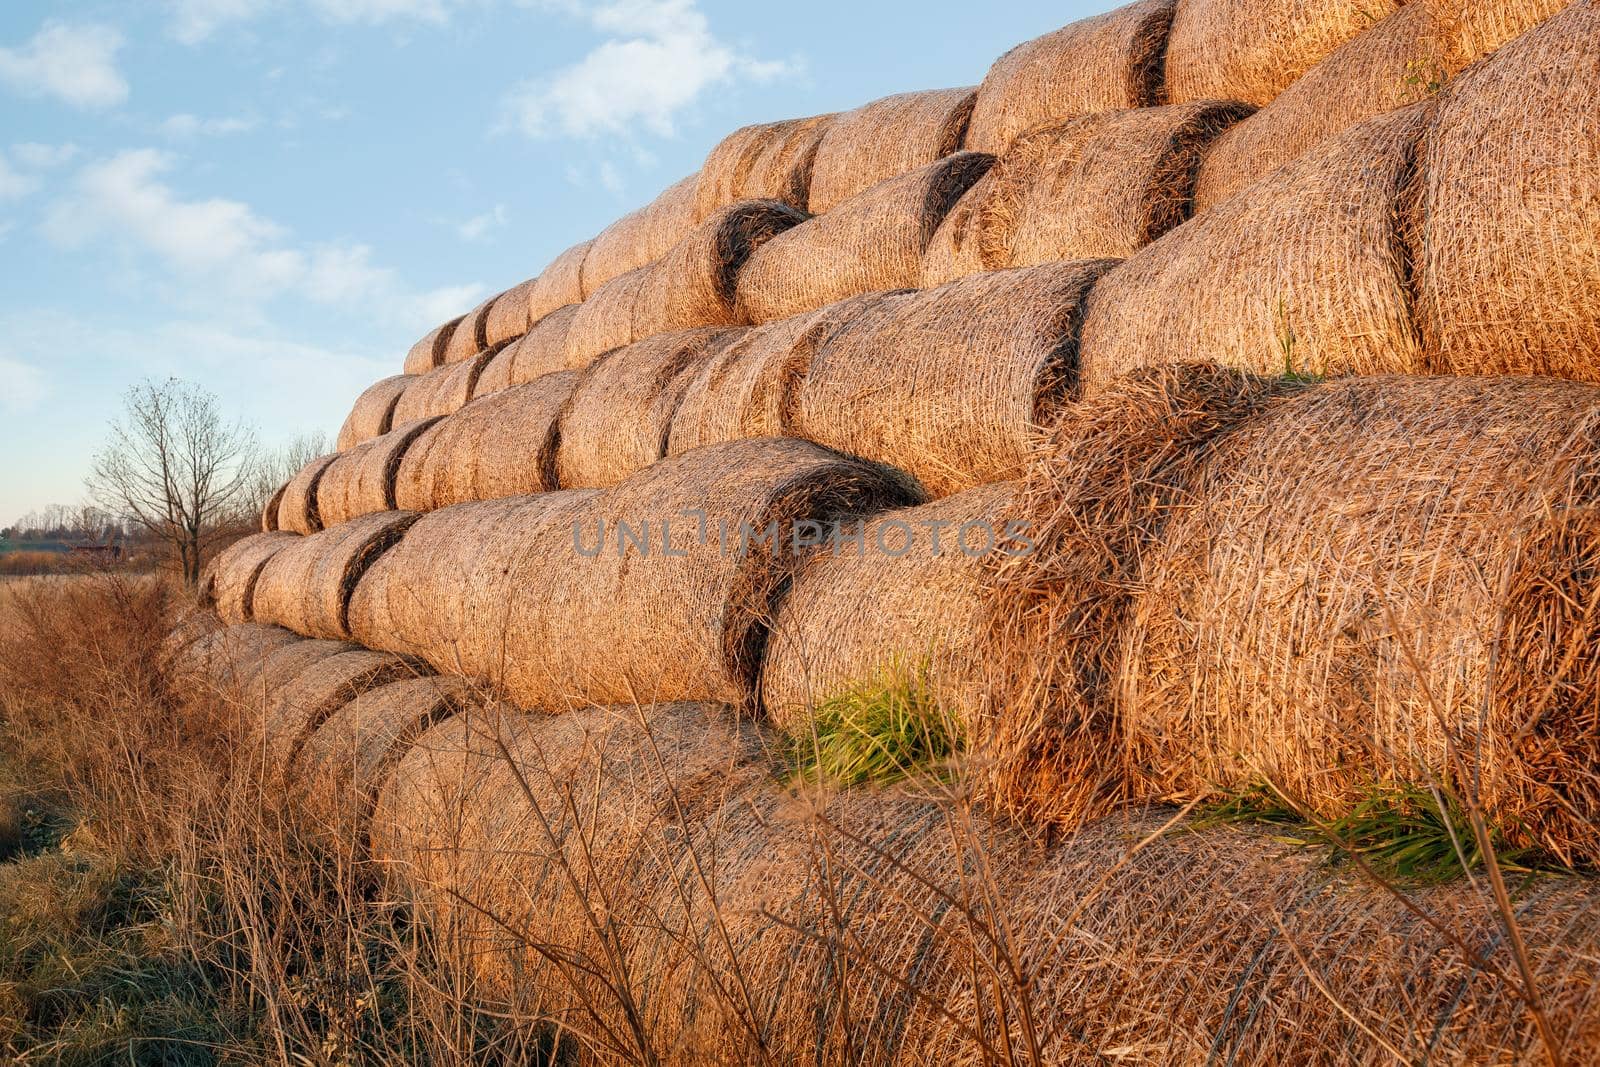 Dry baled hay bales stack, rural countryside straw background. Hay bales straw storage shed full of bales hay on agricultural farm.